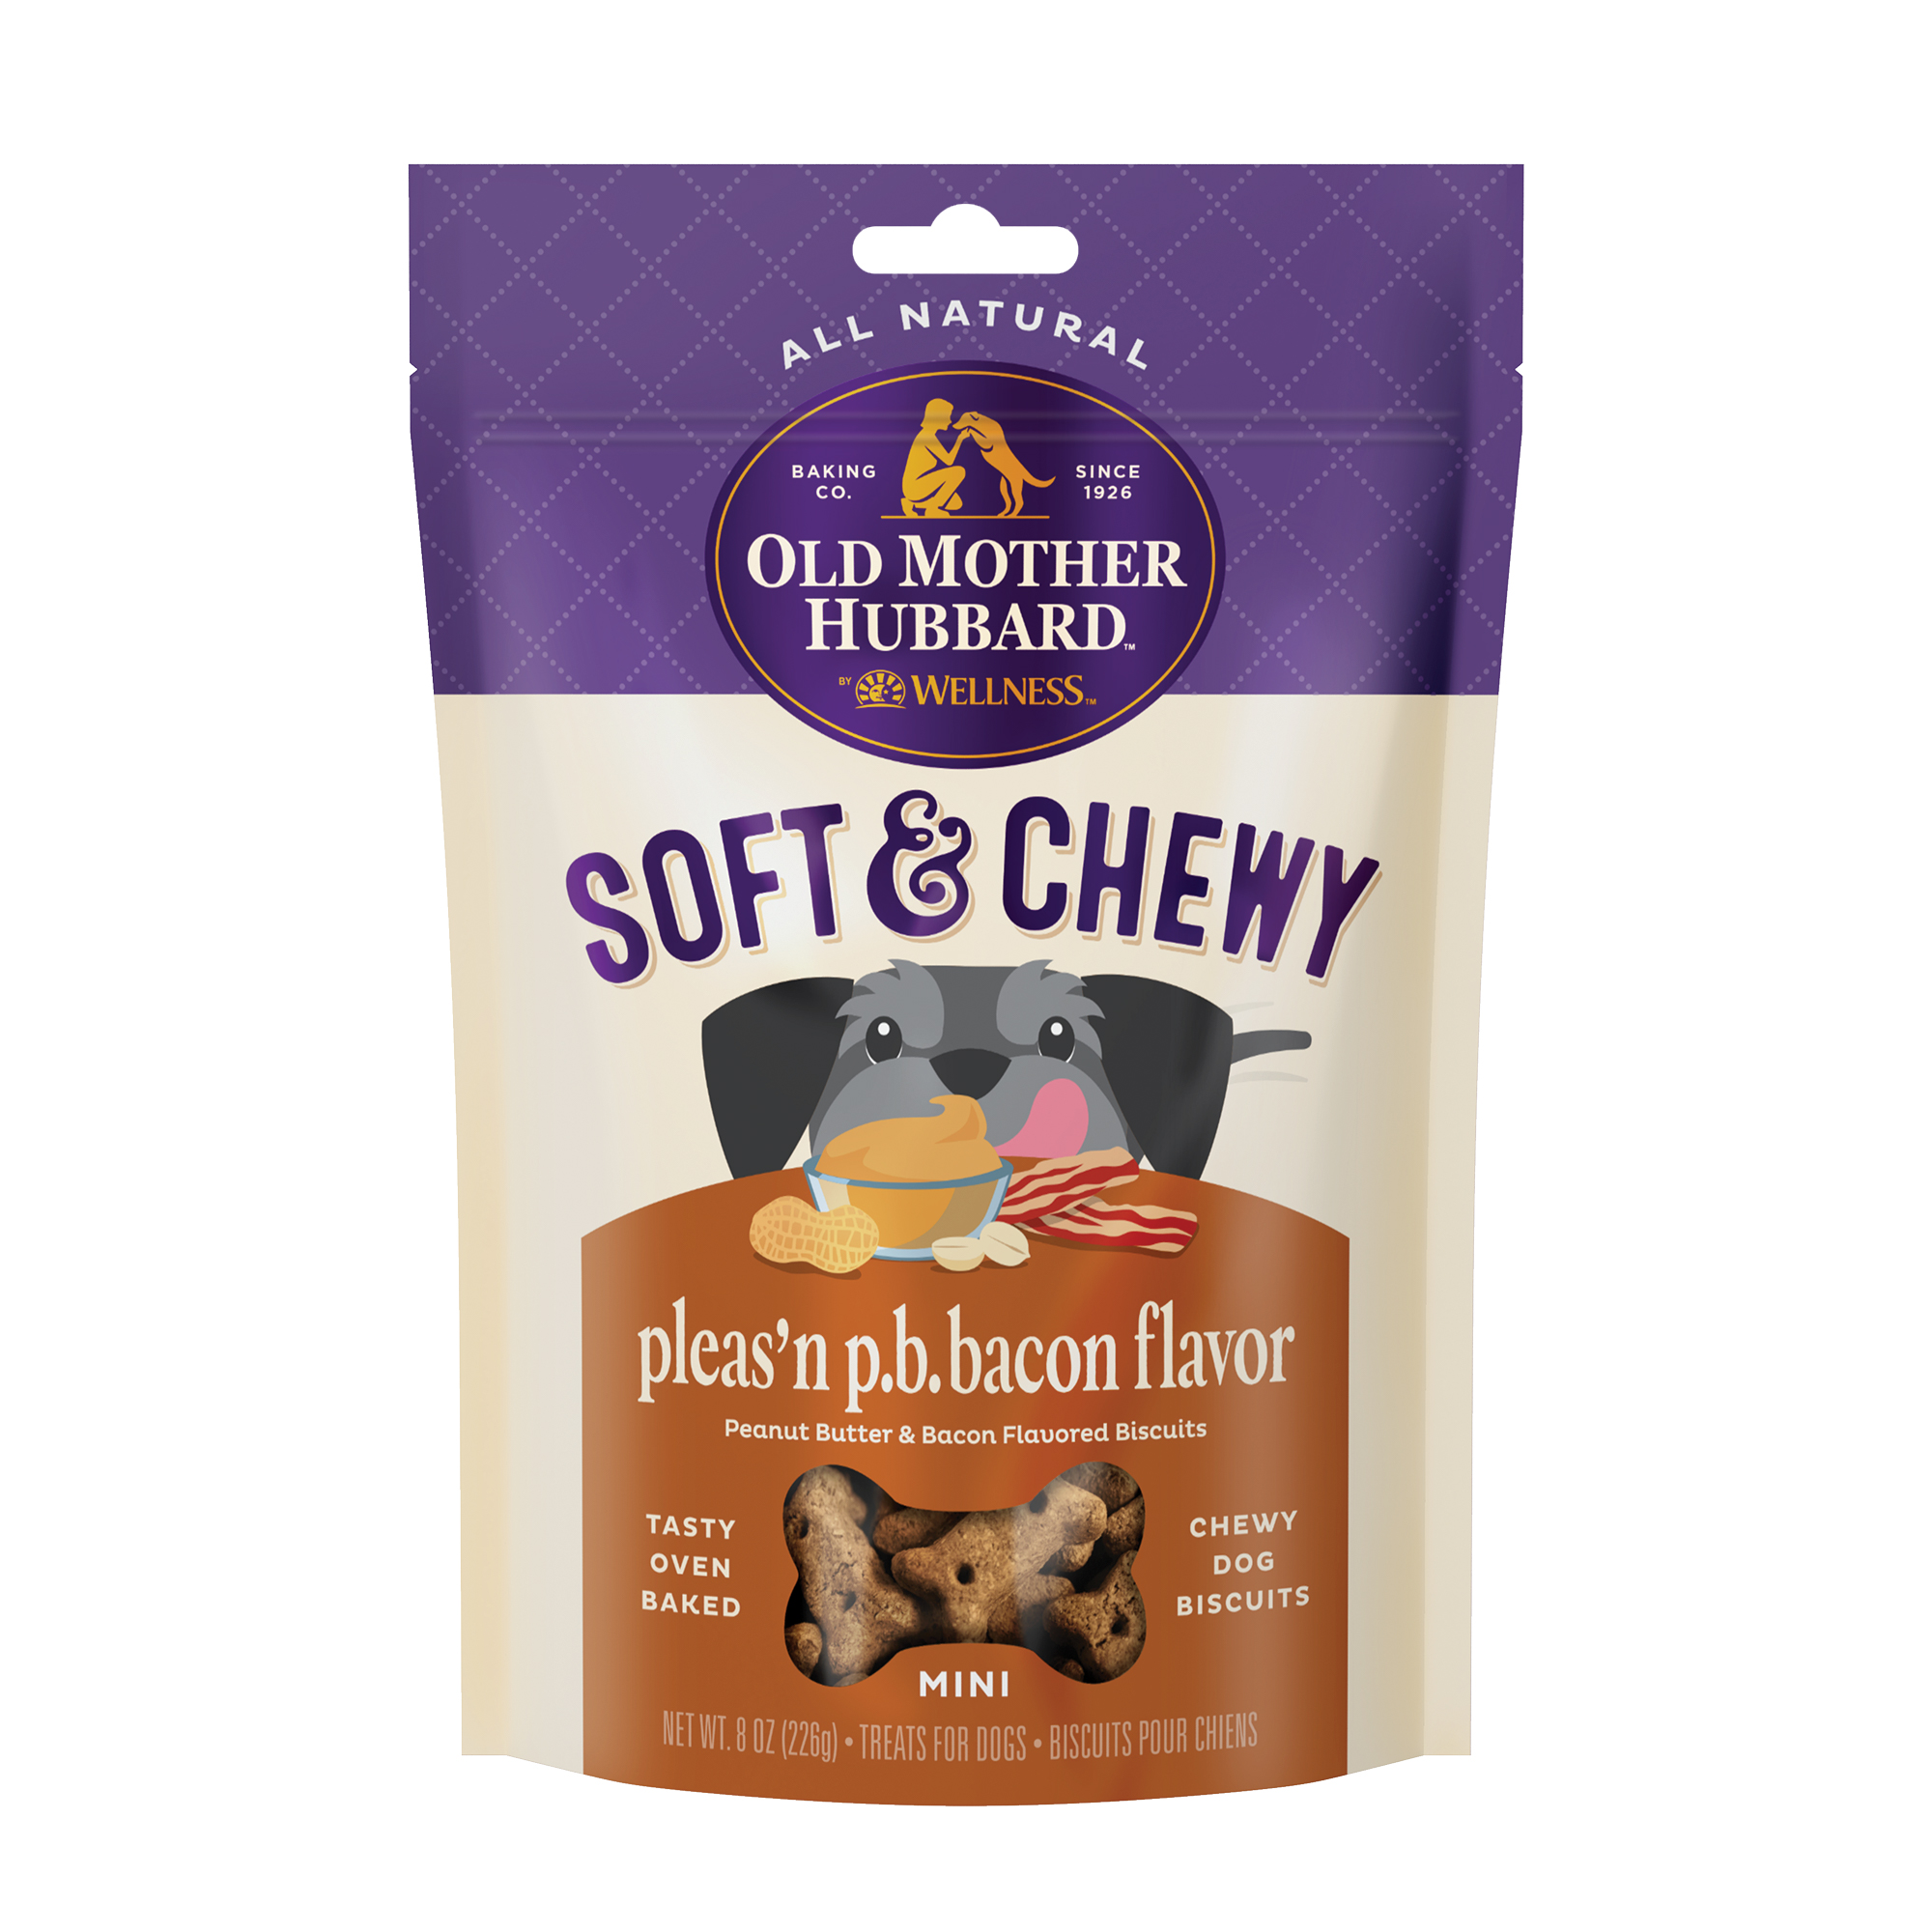 Old Mother Hubbard Soft & Chewy Pleas’n P.B.Bacon